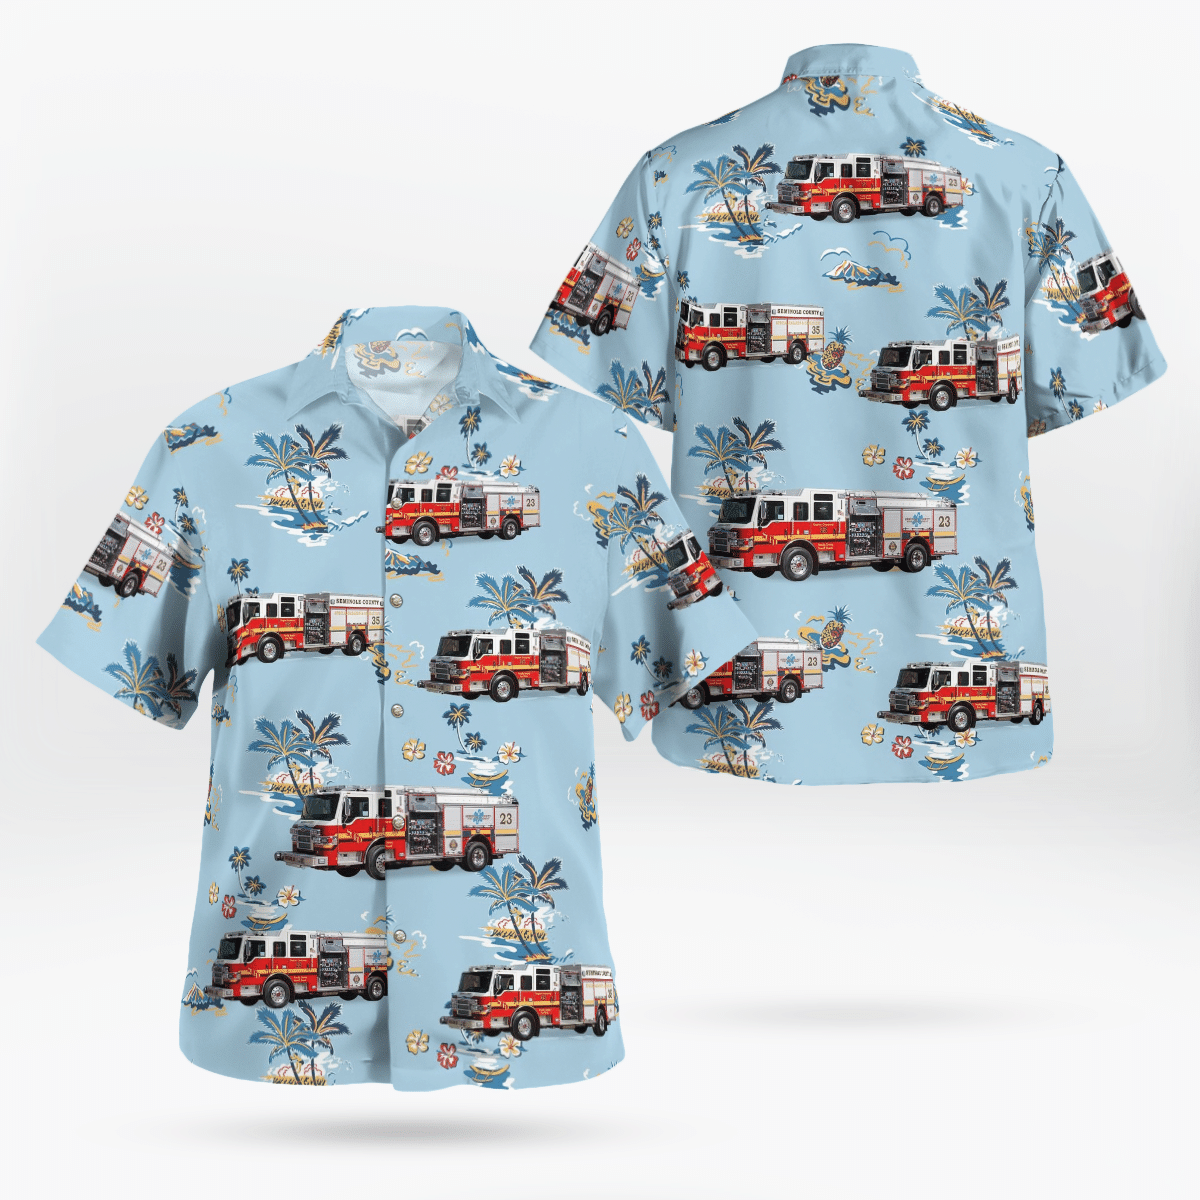 If you are in need of a new summertime look, pick up this Hawaiian shirt 131